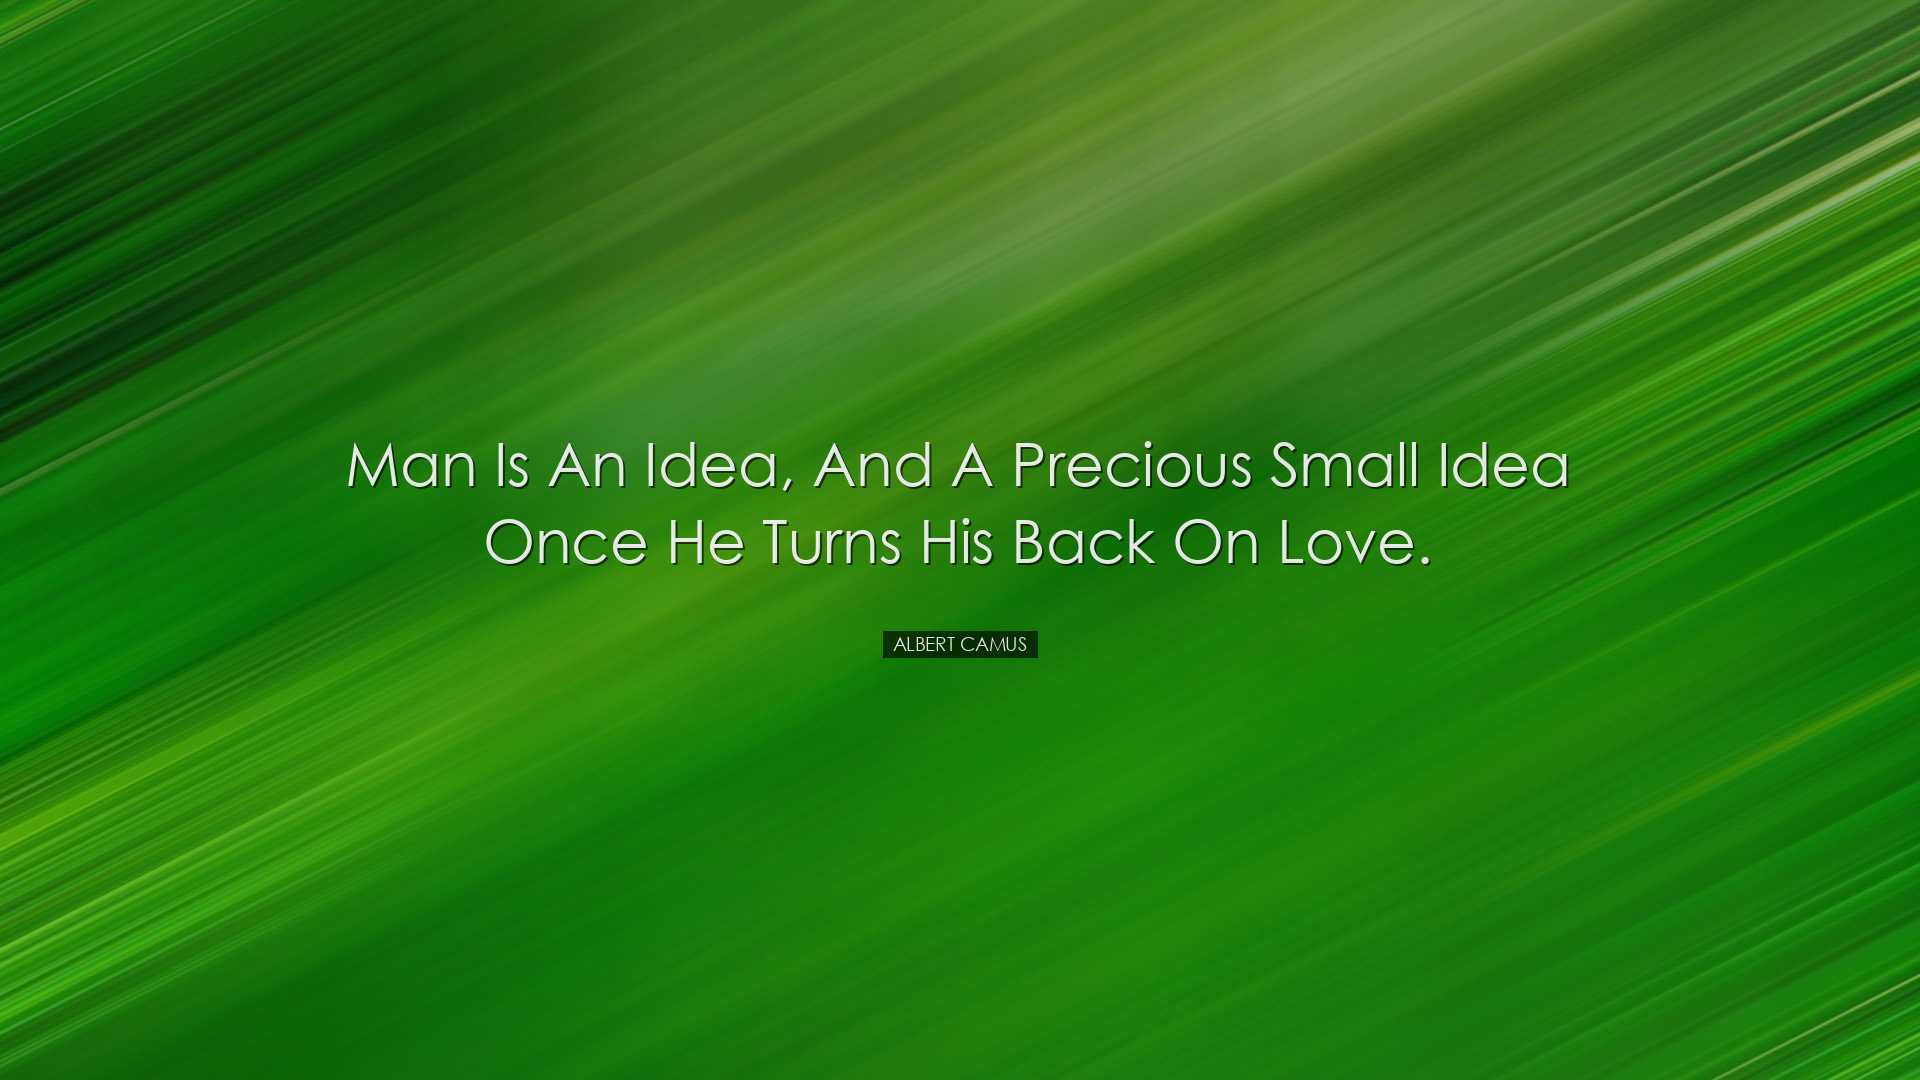 Man is an idea, and a precious small idea once he turns his back o